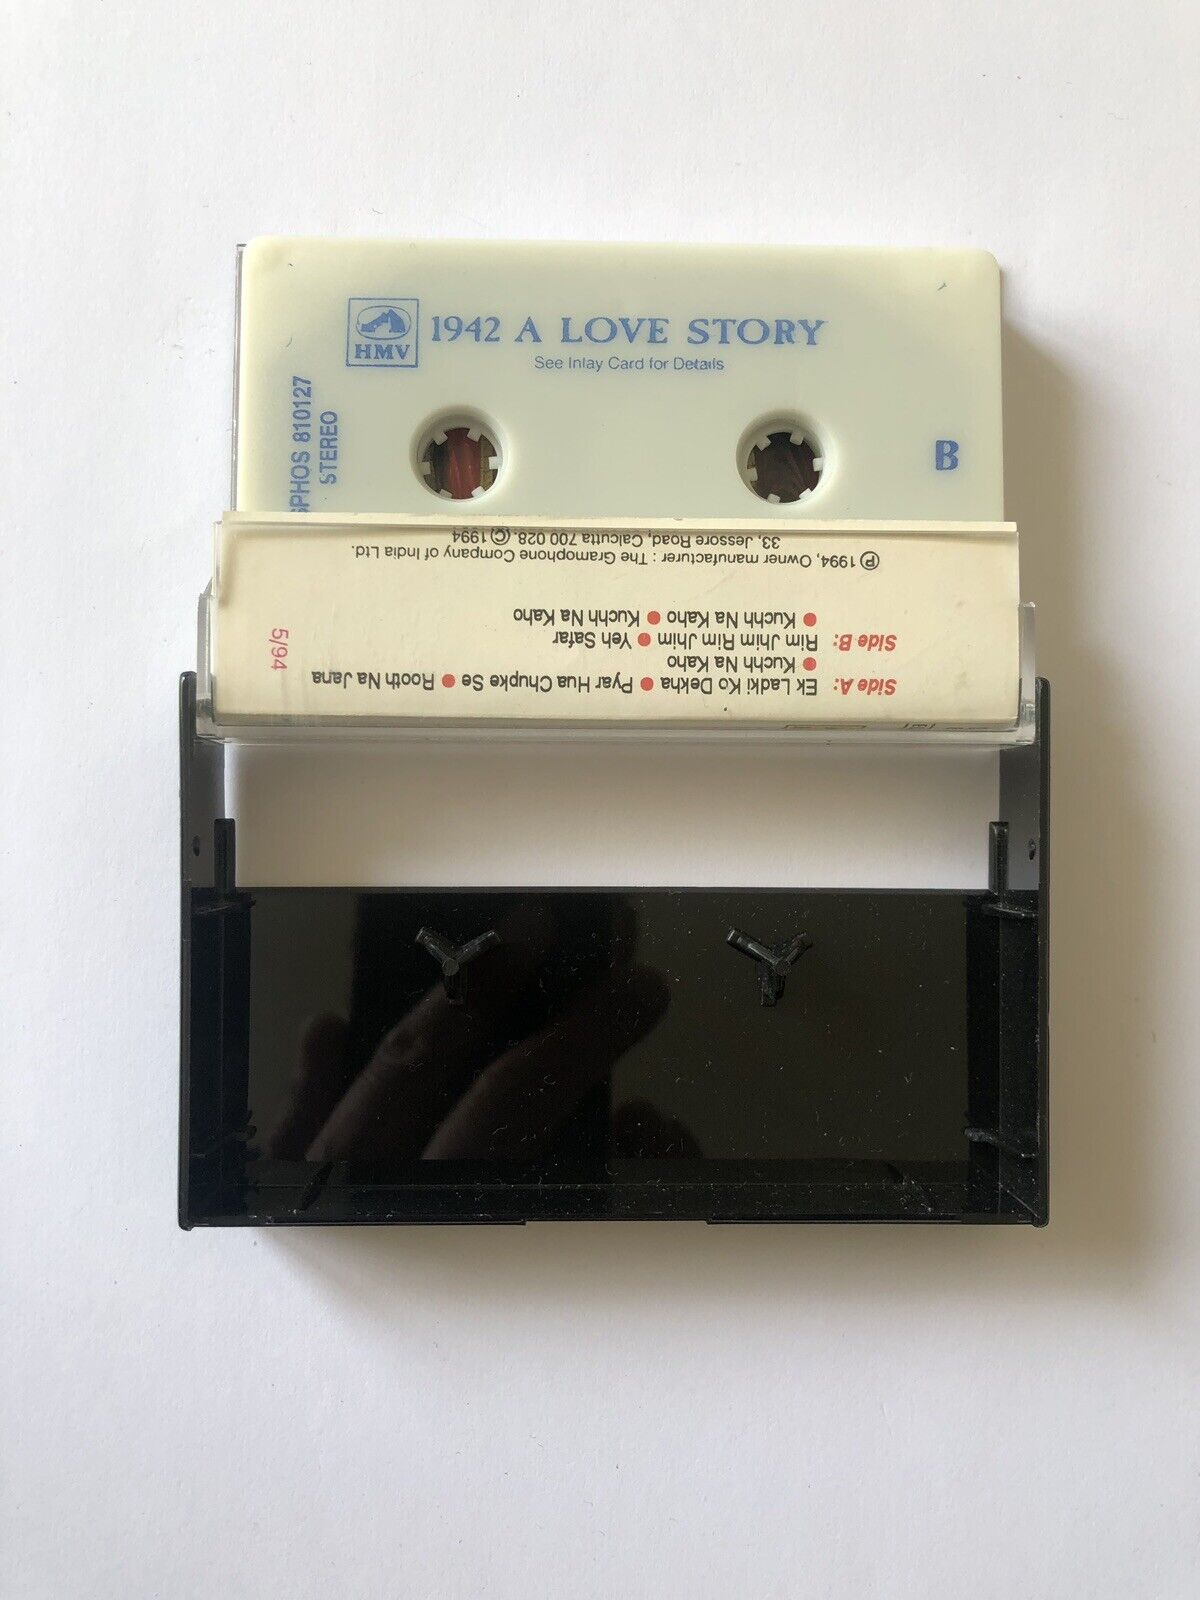 adrian findlay recommends india love second tape pic